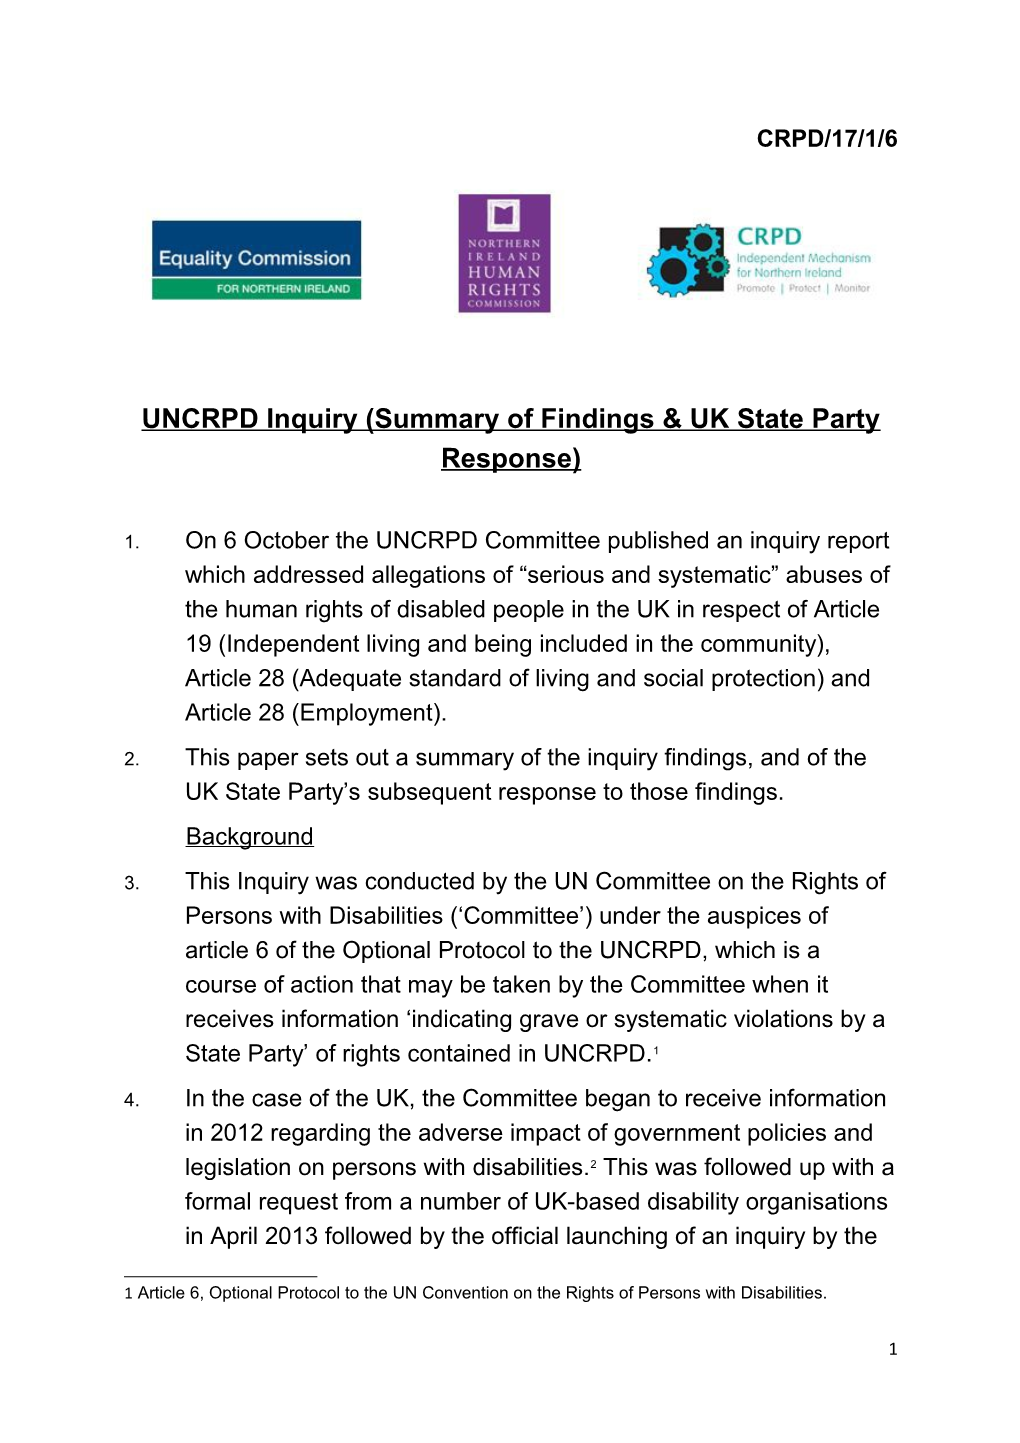 UNCRPD Inquiry (Summary of Findings & UK State Party Response)